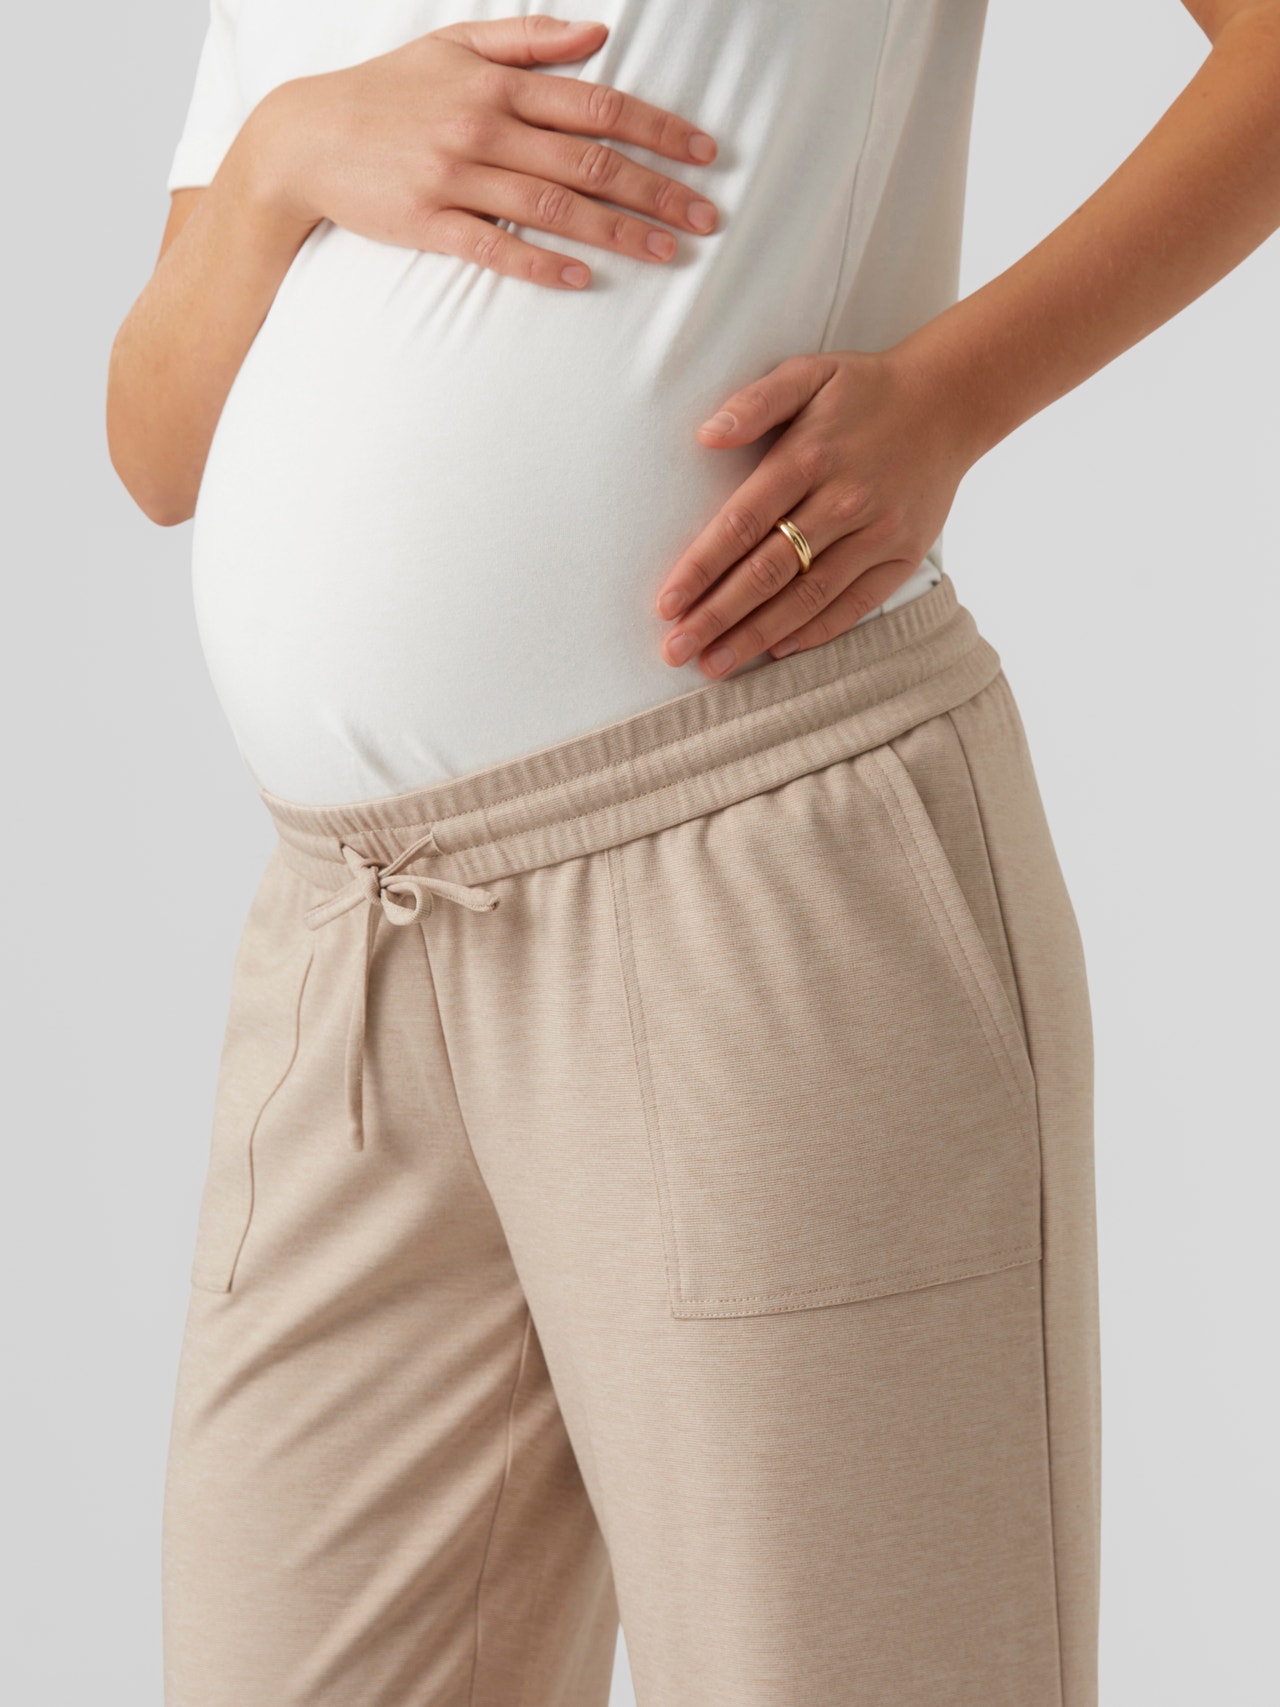 Maternity-trousers with 40% discount!